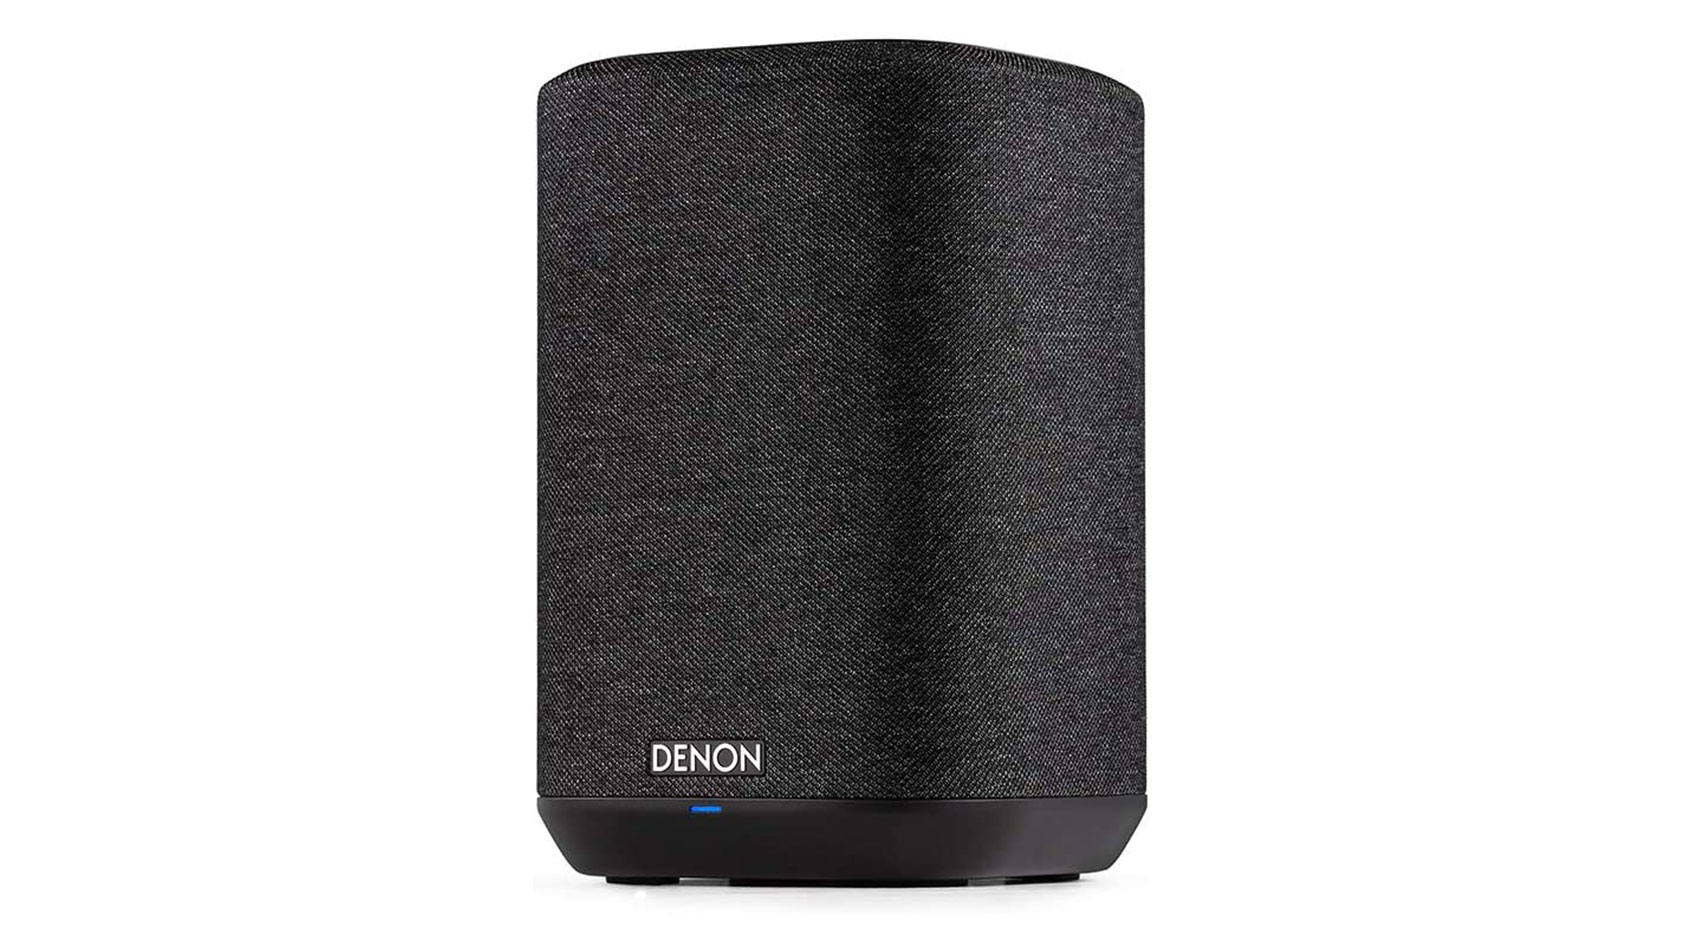 Product image of a Denon Home 150 Wireless speaker on a white background